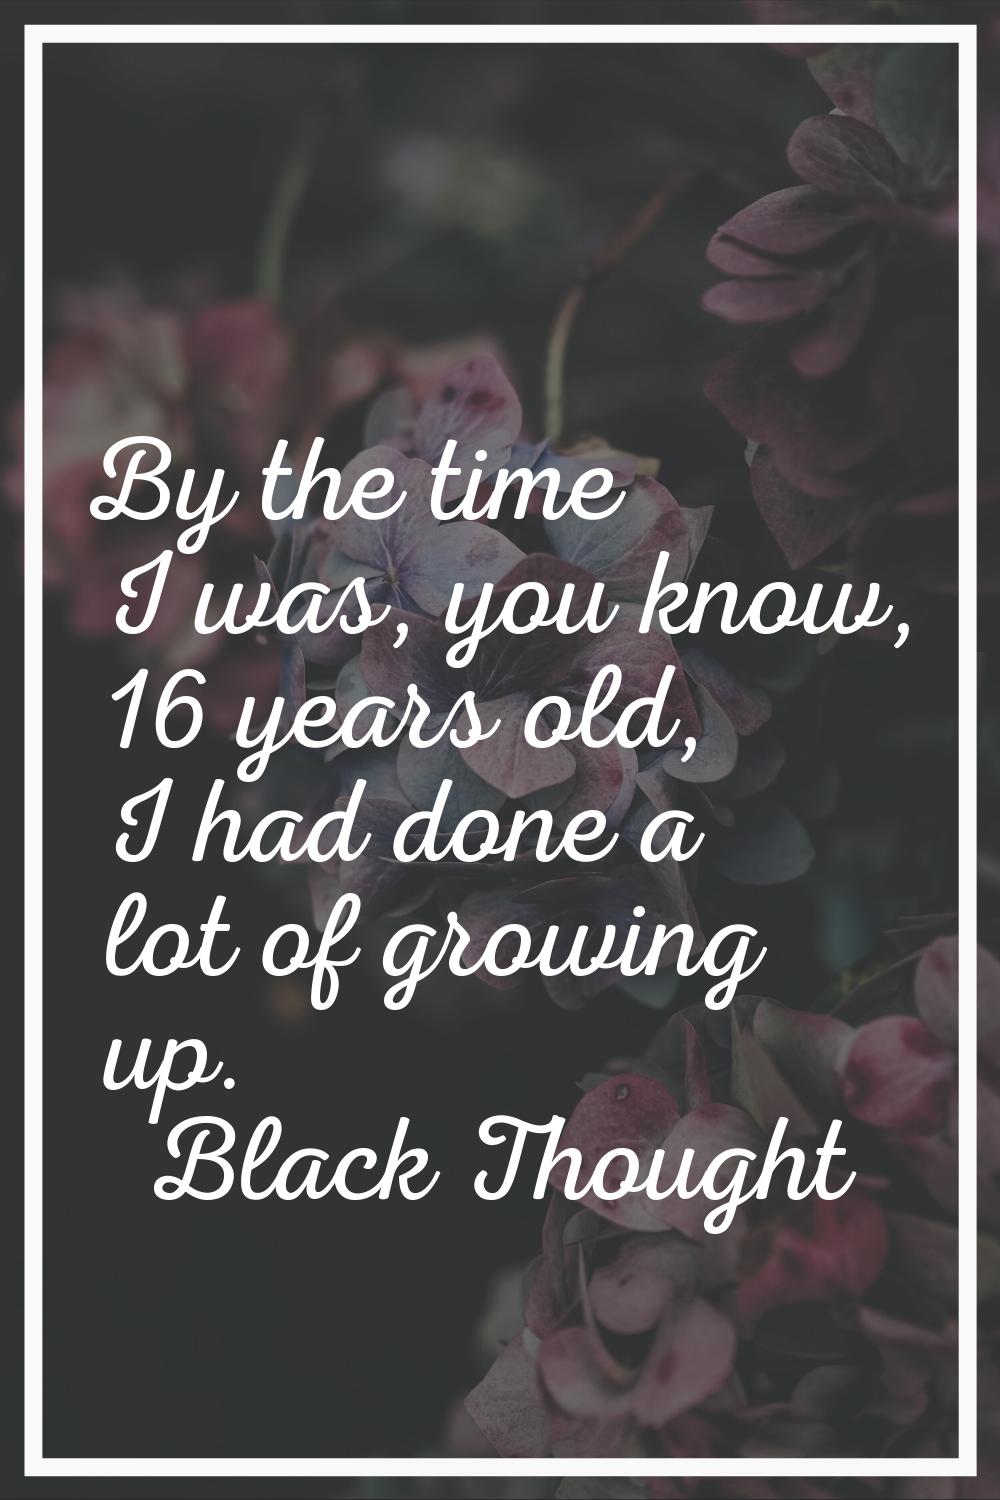 By the time I was, you know, 16 years old, I had done a lot of growing up.